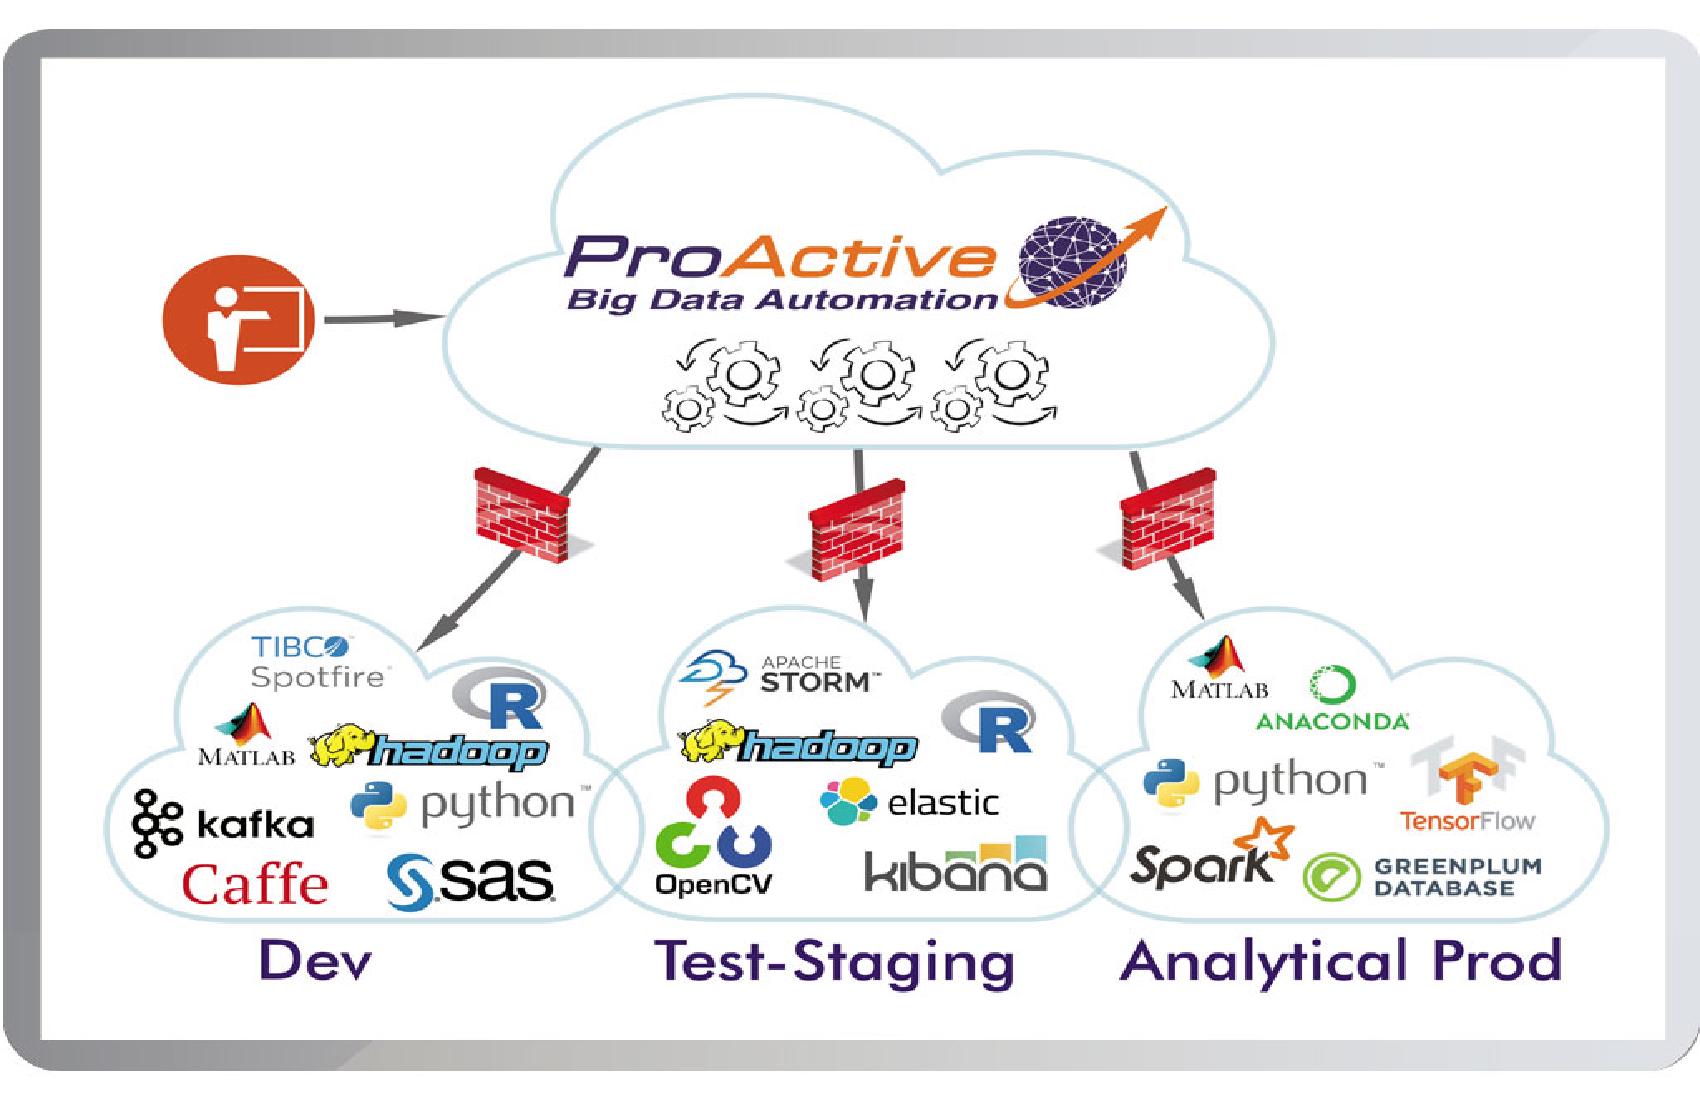 images/product-screenshots/proactive-big-data-automation-orchestration-frame.jpg